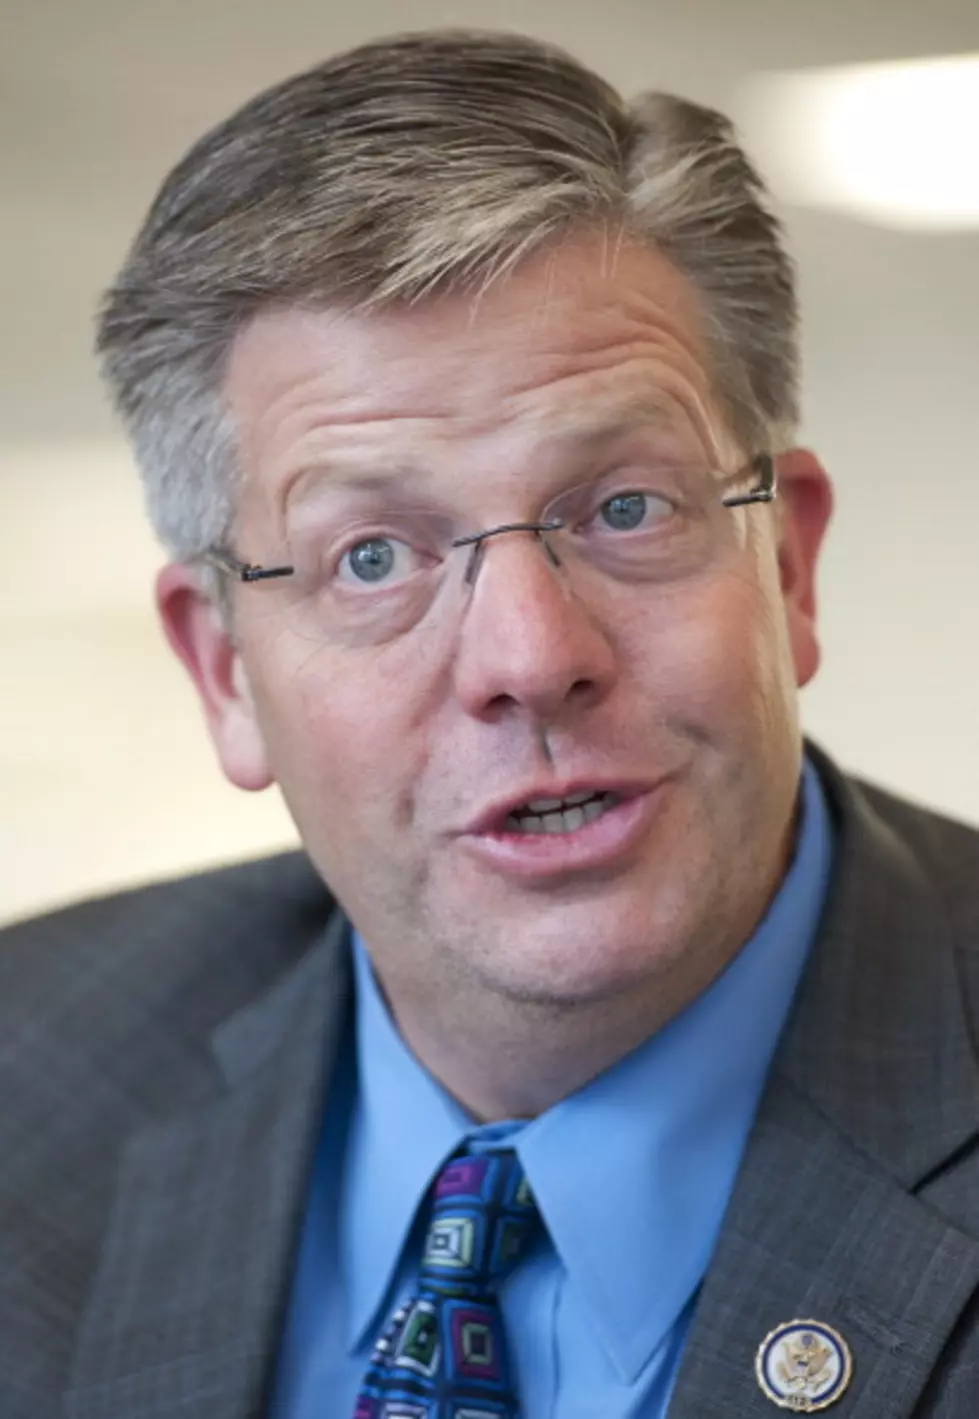 Congressman Randy Hultgren on Infrastructure, Tax Cuts, and More